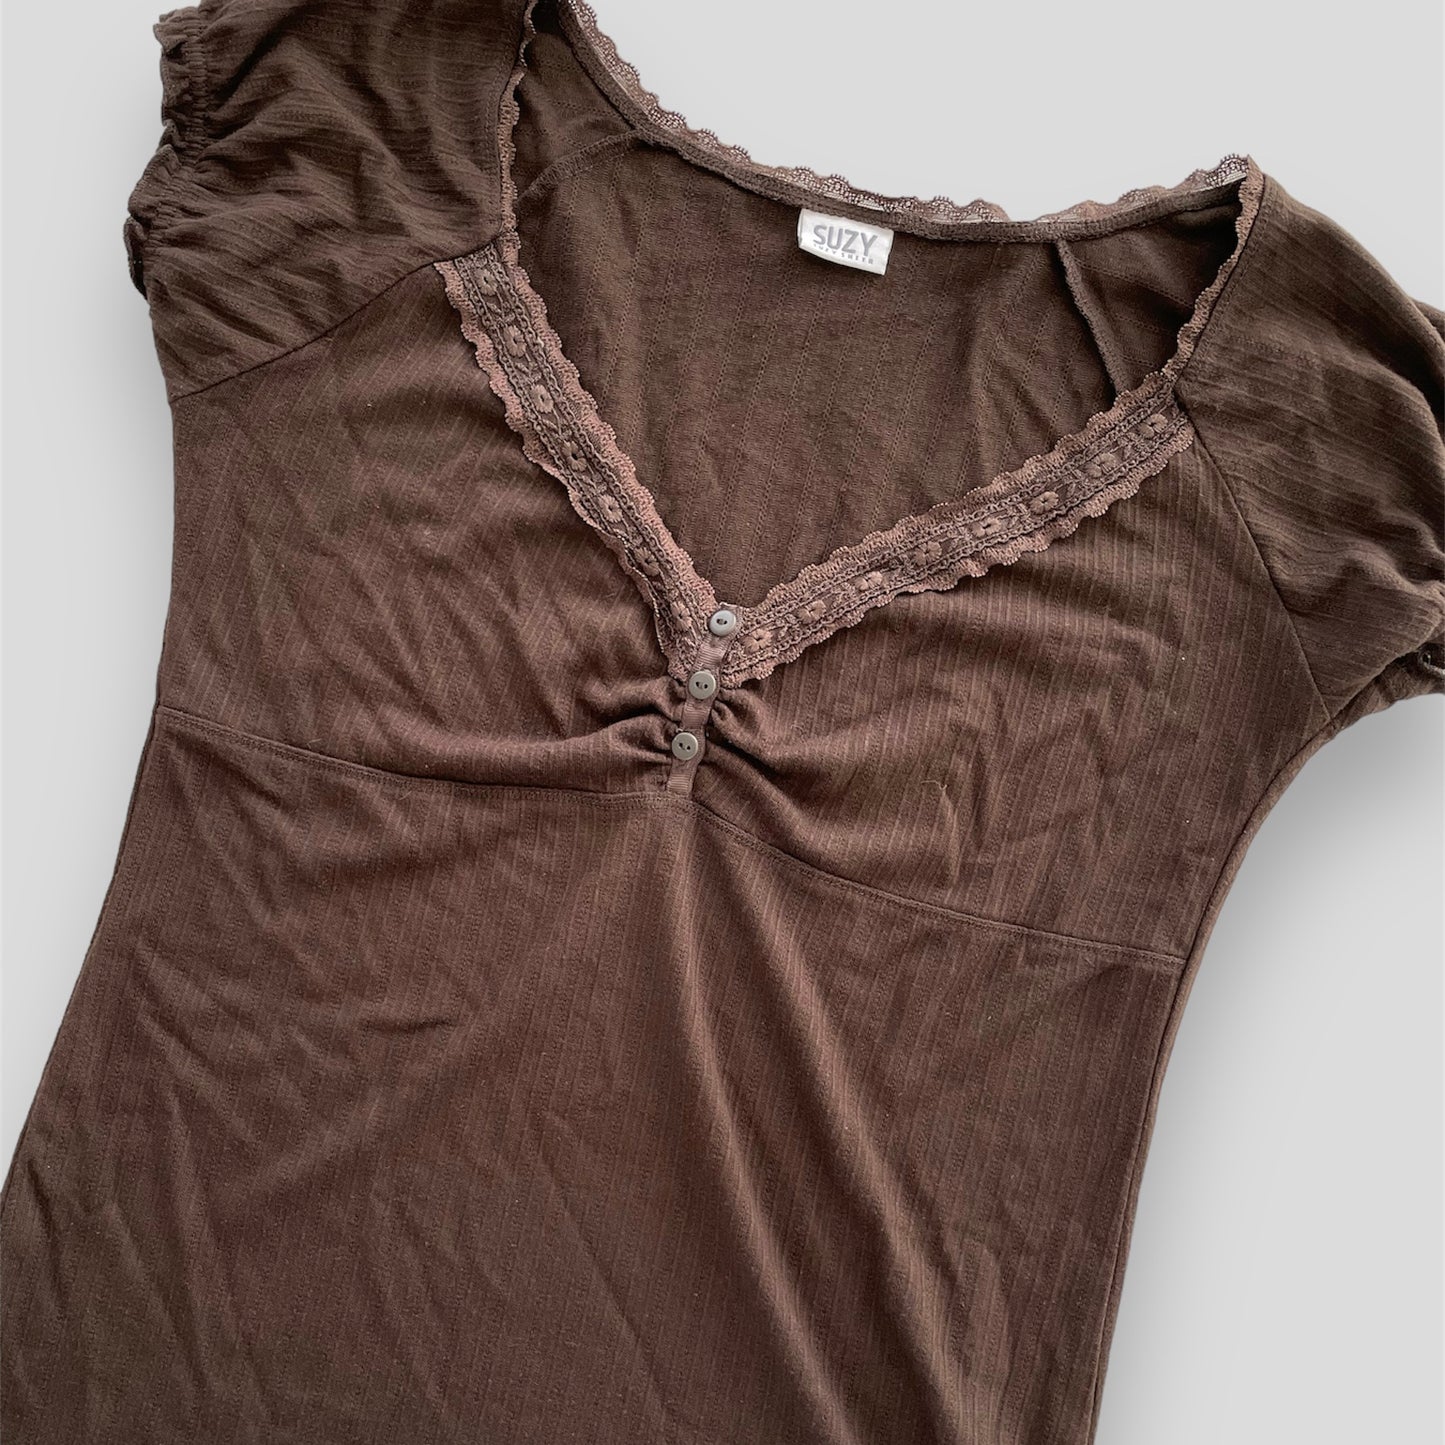 Suzy Shier Brown Pointelle V-Neck Milkmaid Top - Large